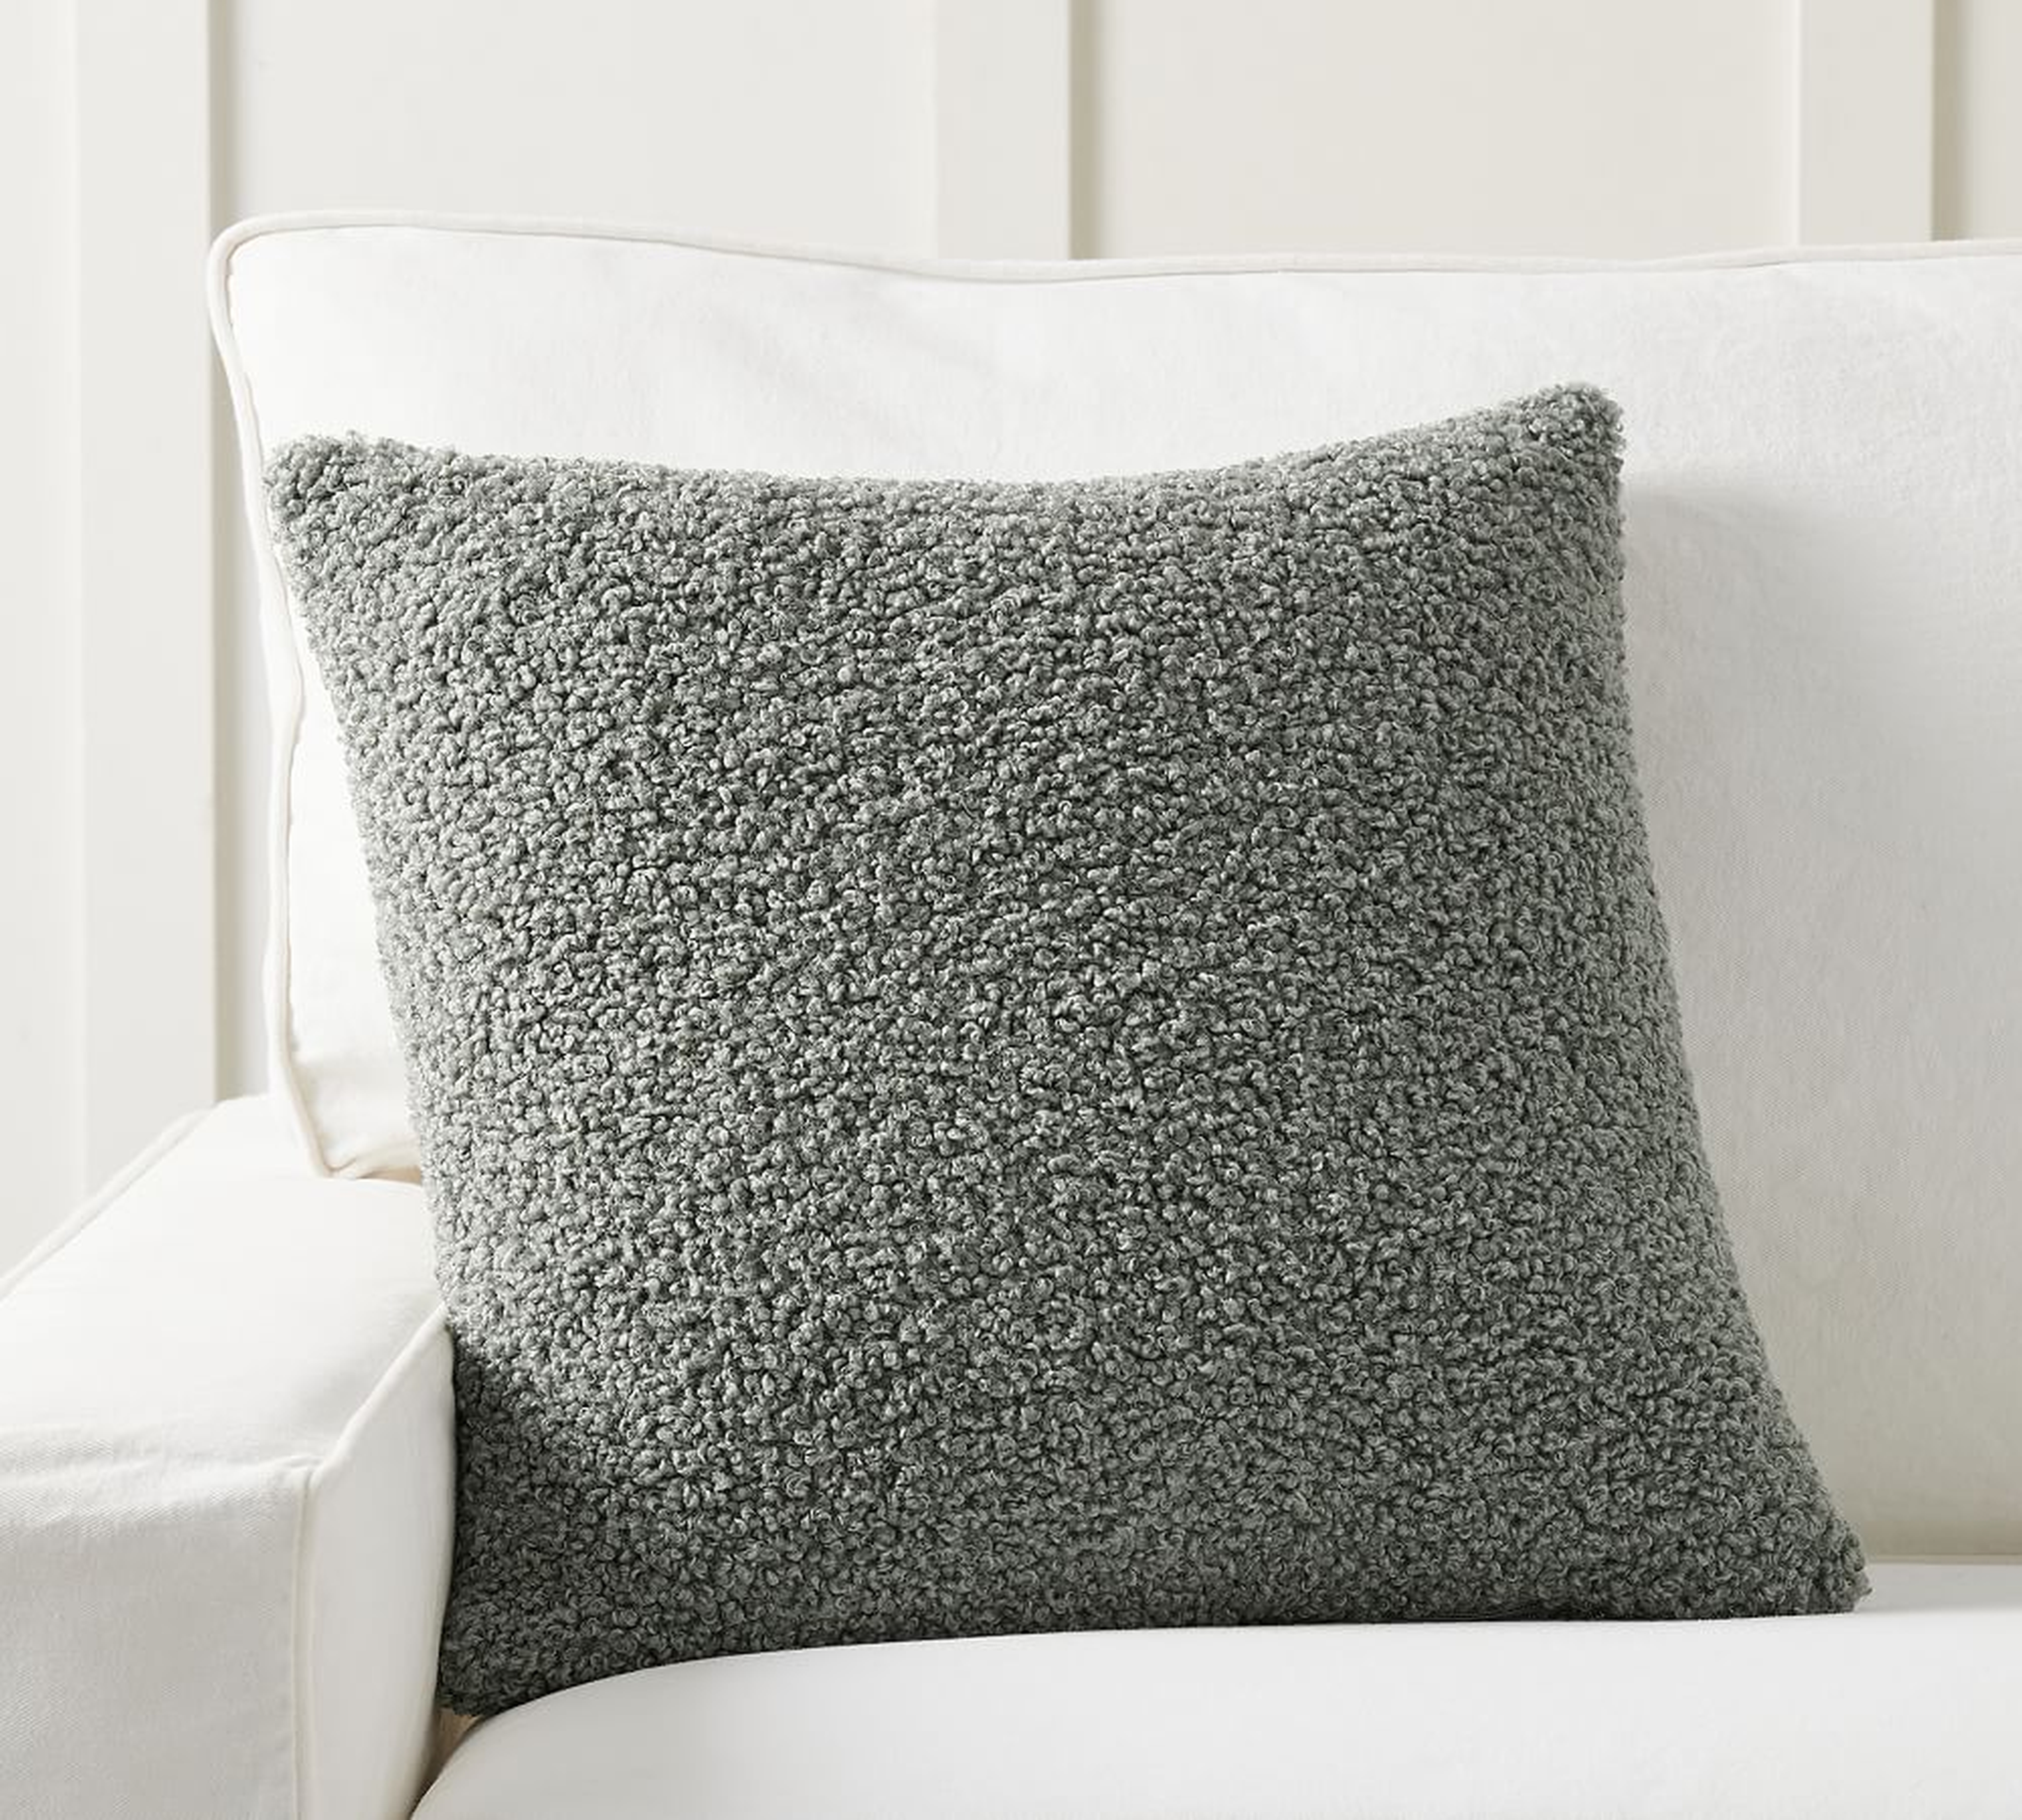 Cozy Teddy Faux Fur Pillow Cover, 20 x 20", Sage - Pottery Barn